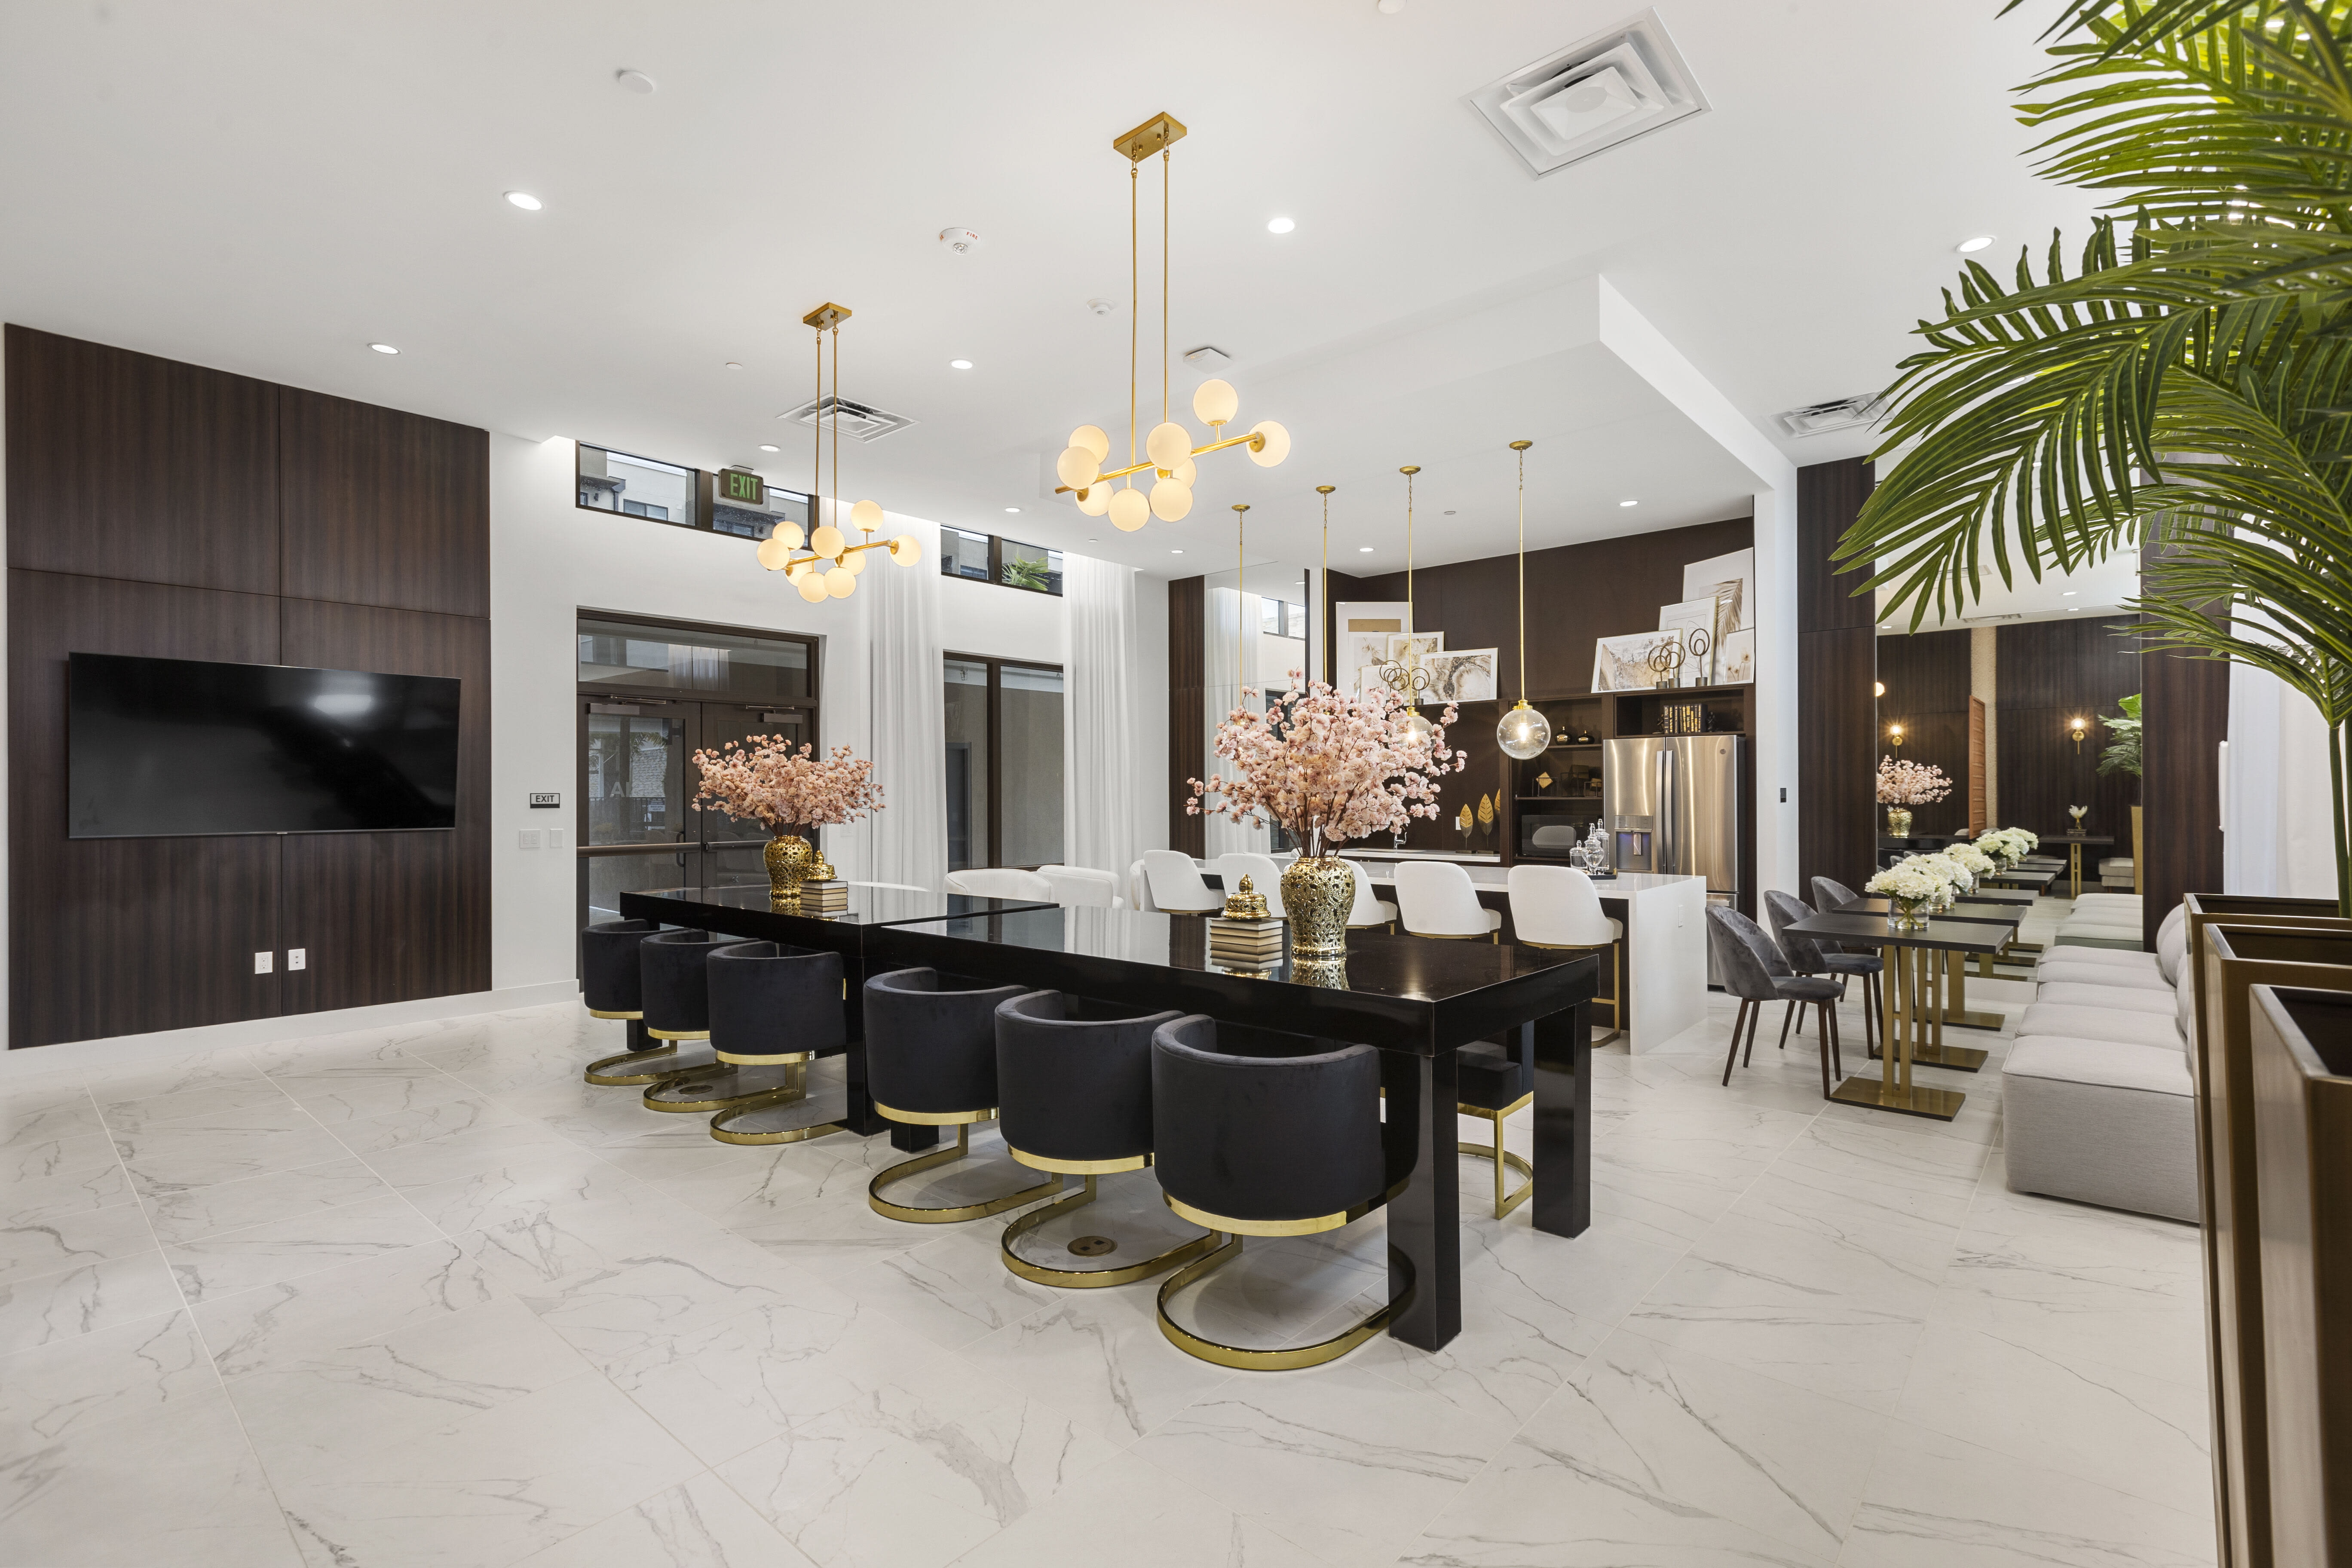 Modern clubhouse offering high-end lighting, comfortable seating, and contemporary furnishings at Pine Ridge, West Palm Beach, Florida